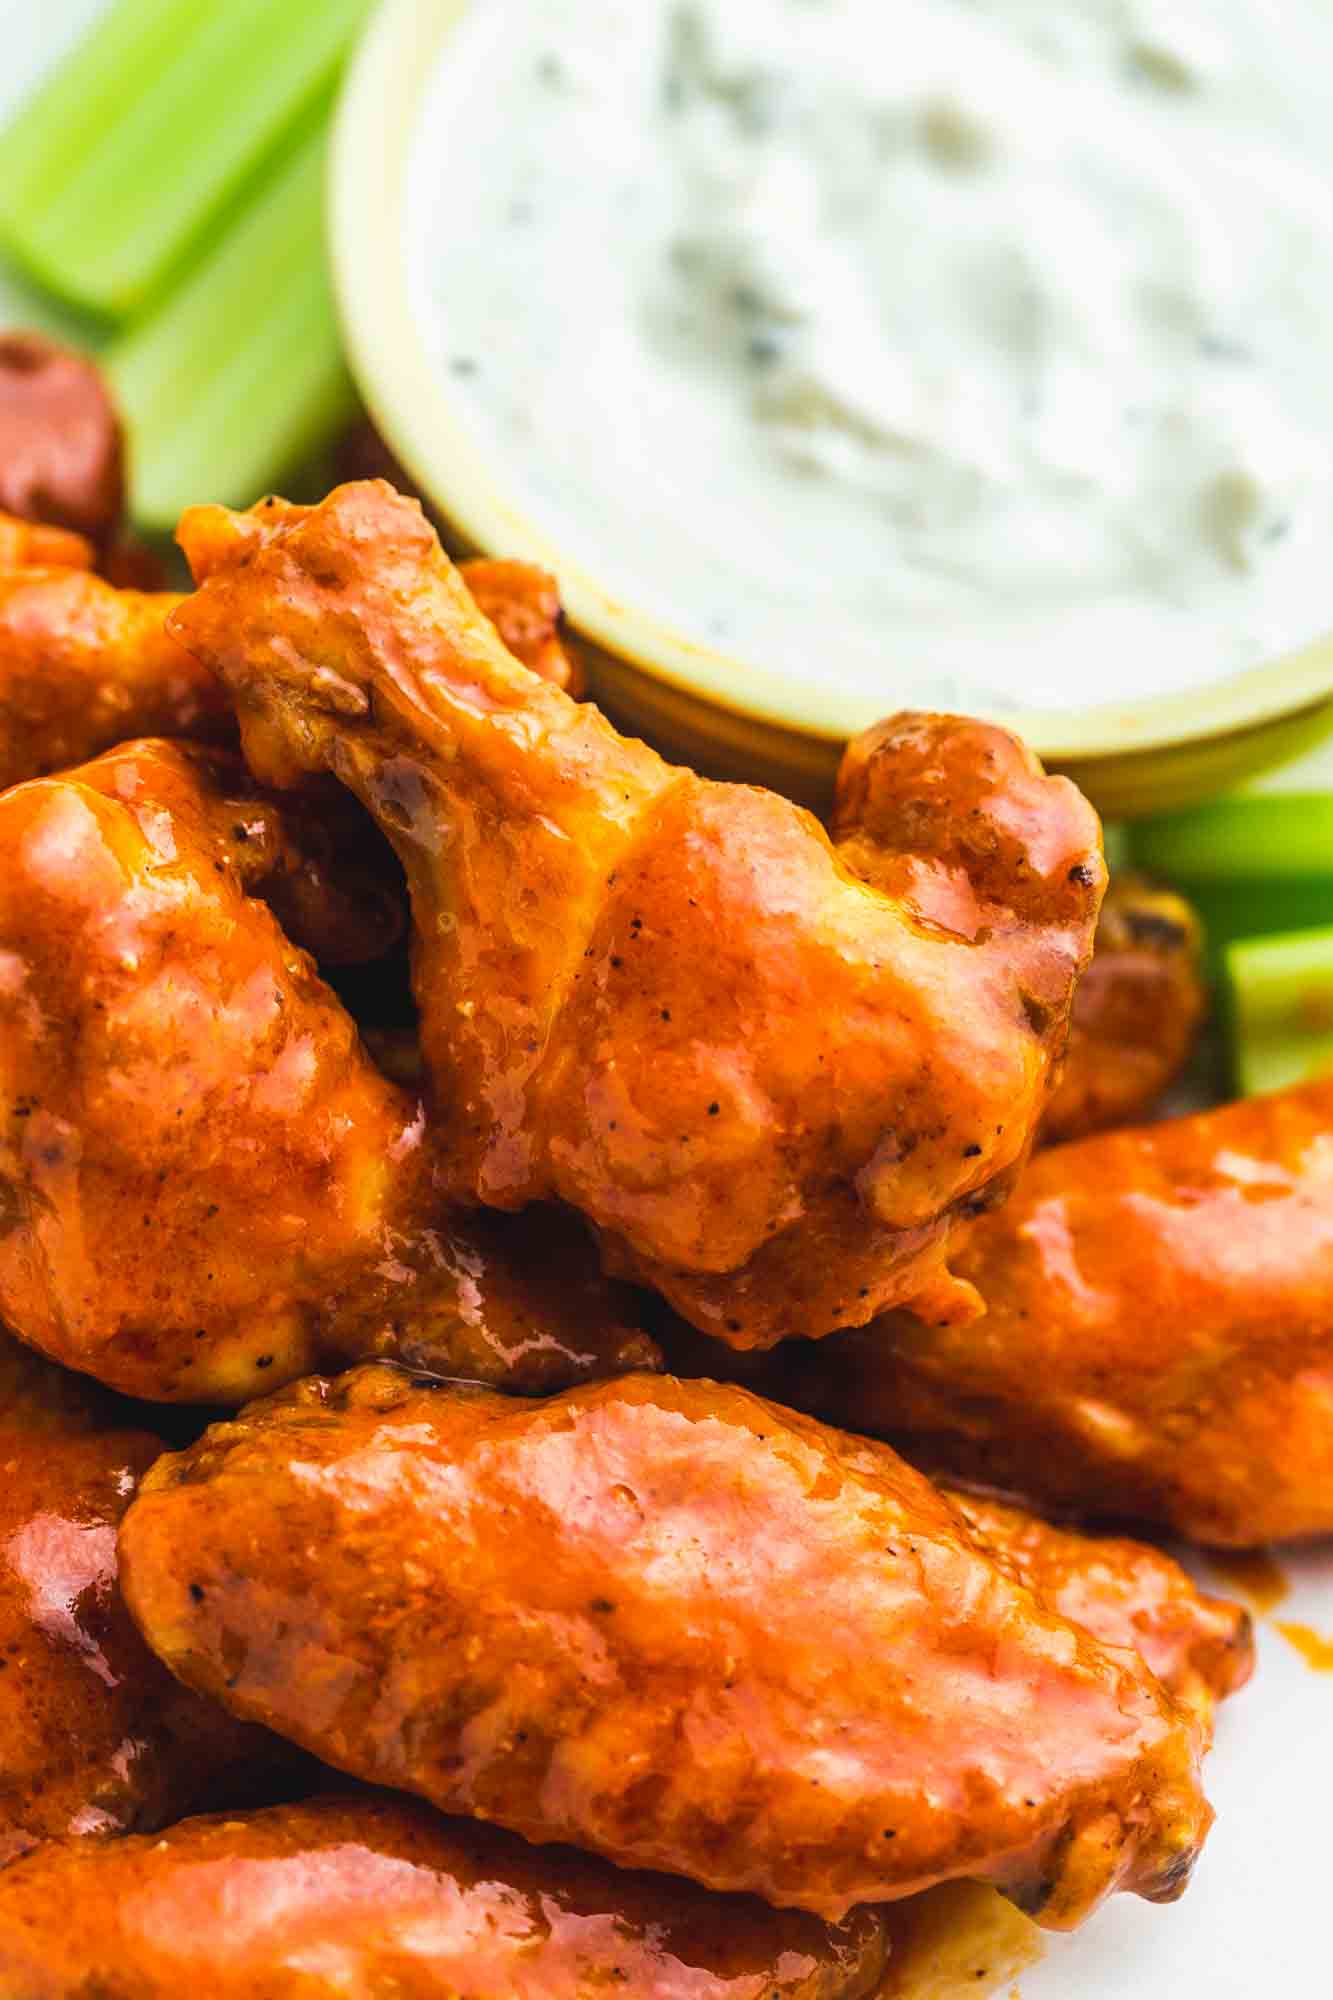 Buffalo chicken wings stacked, with blue cheese dip and celery sticks in the background.